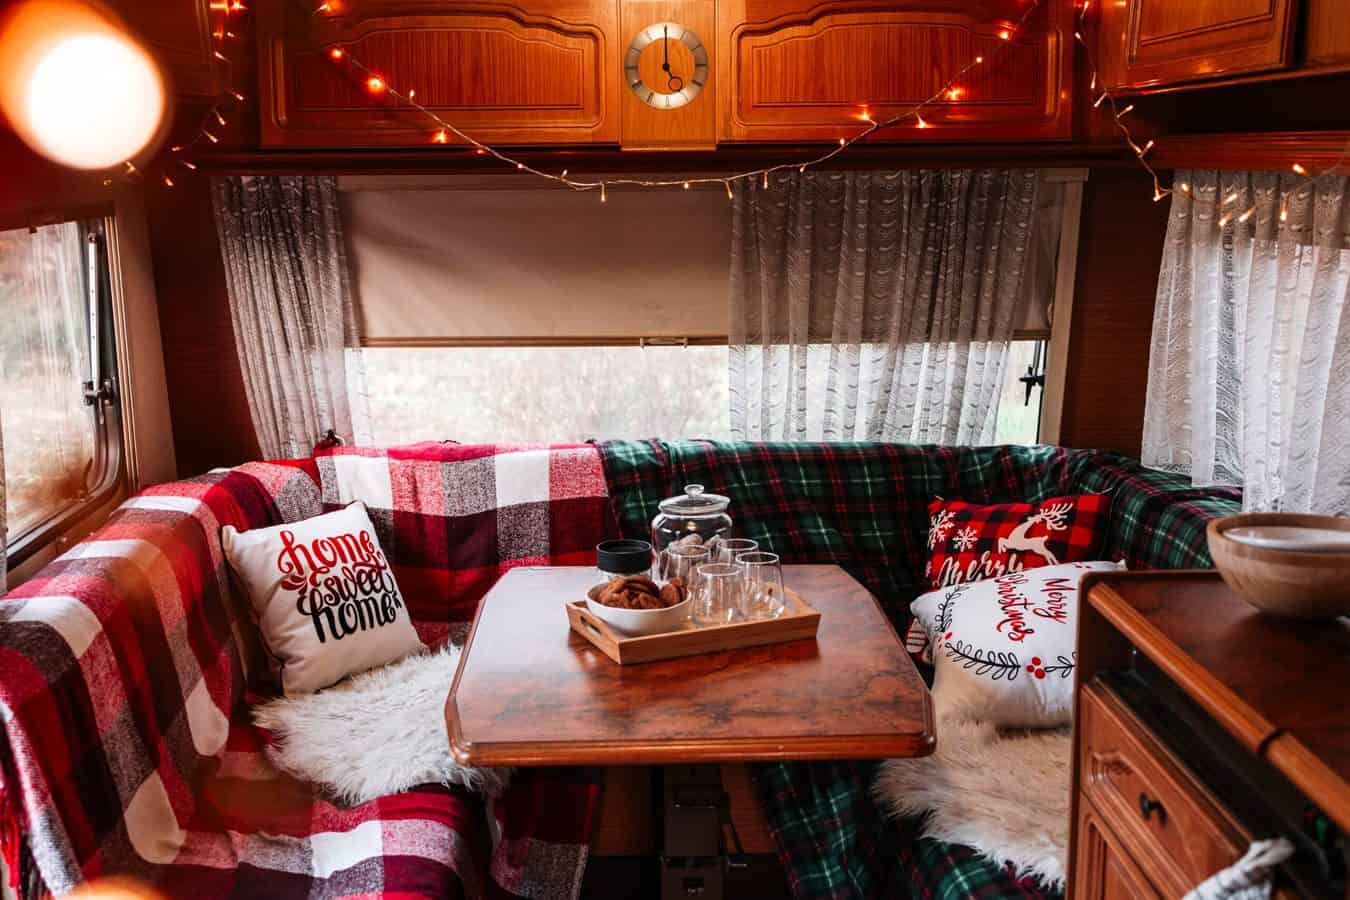 Inside of a travel trailer decorated for Christmas